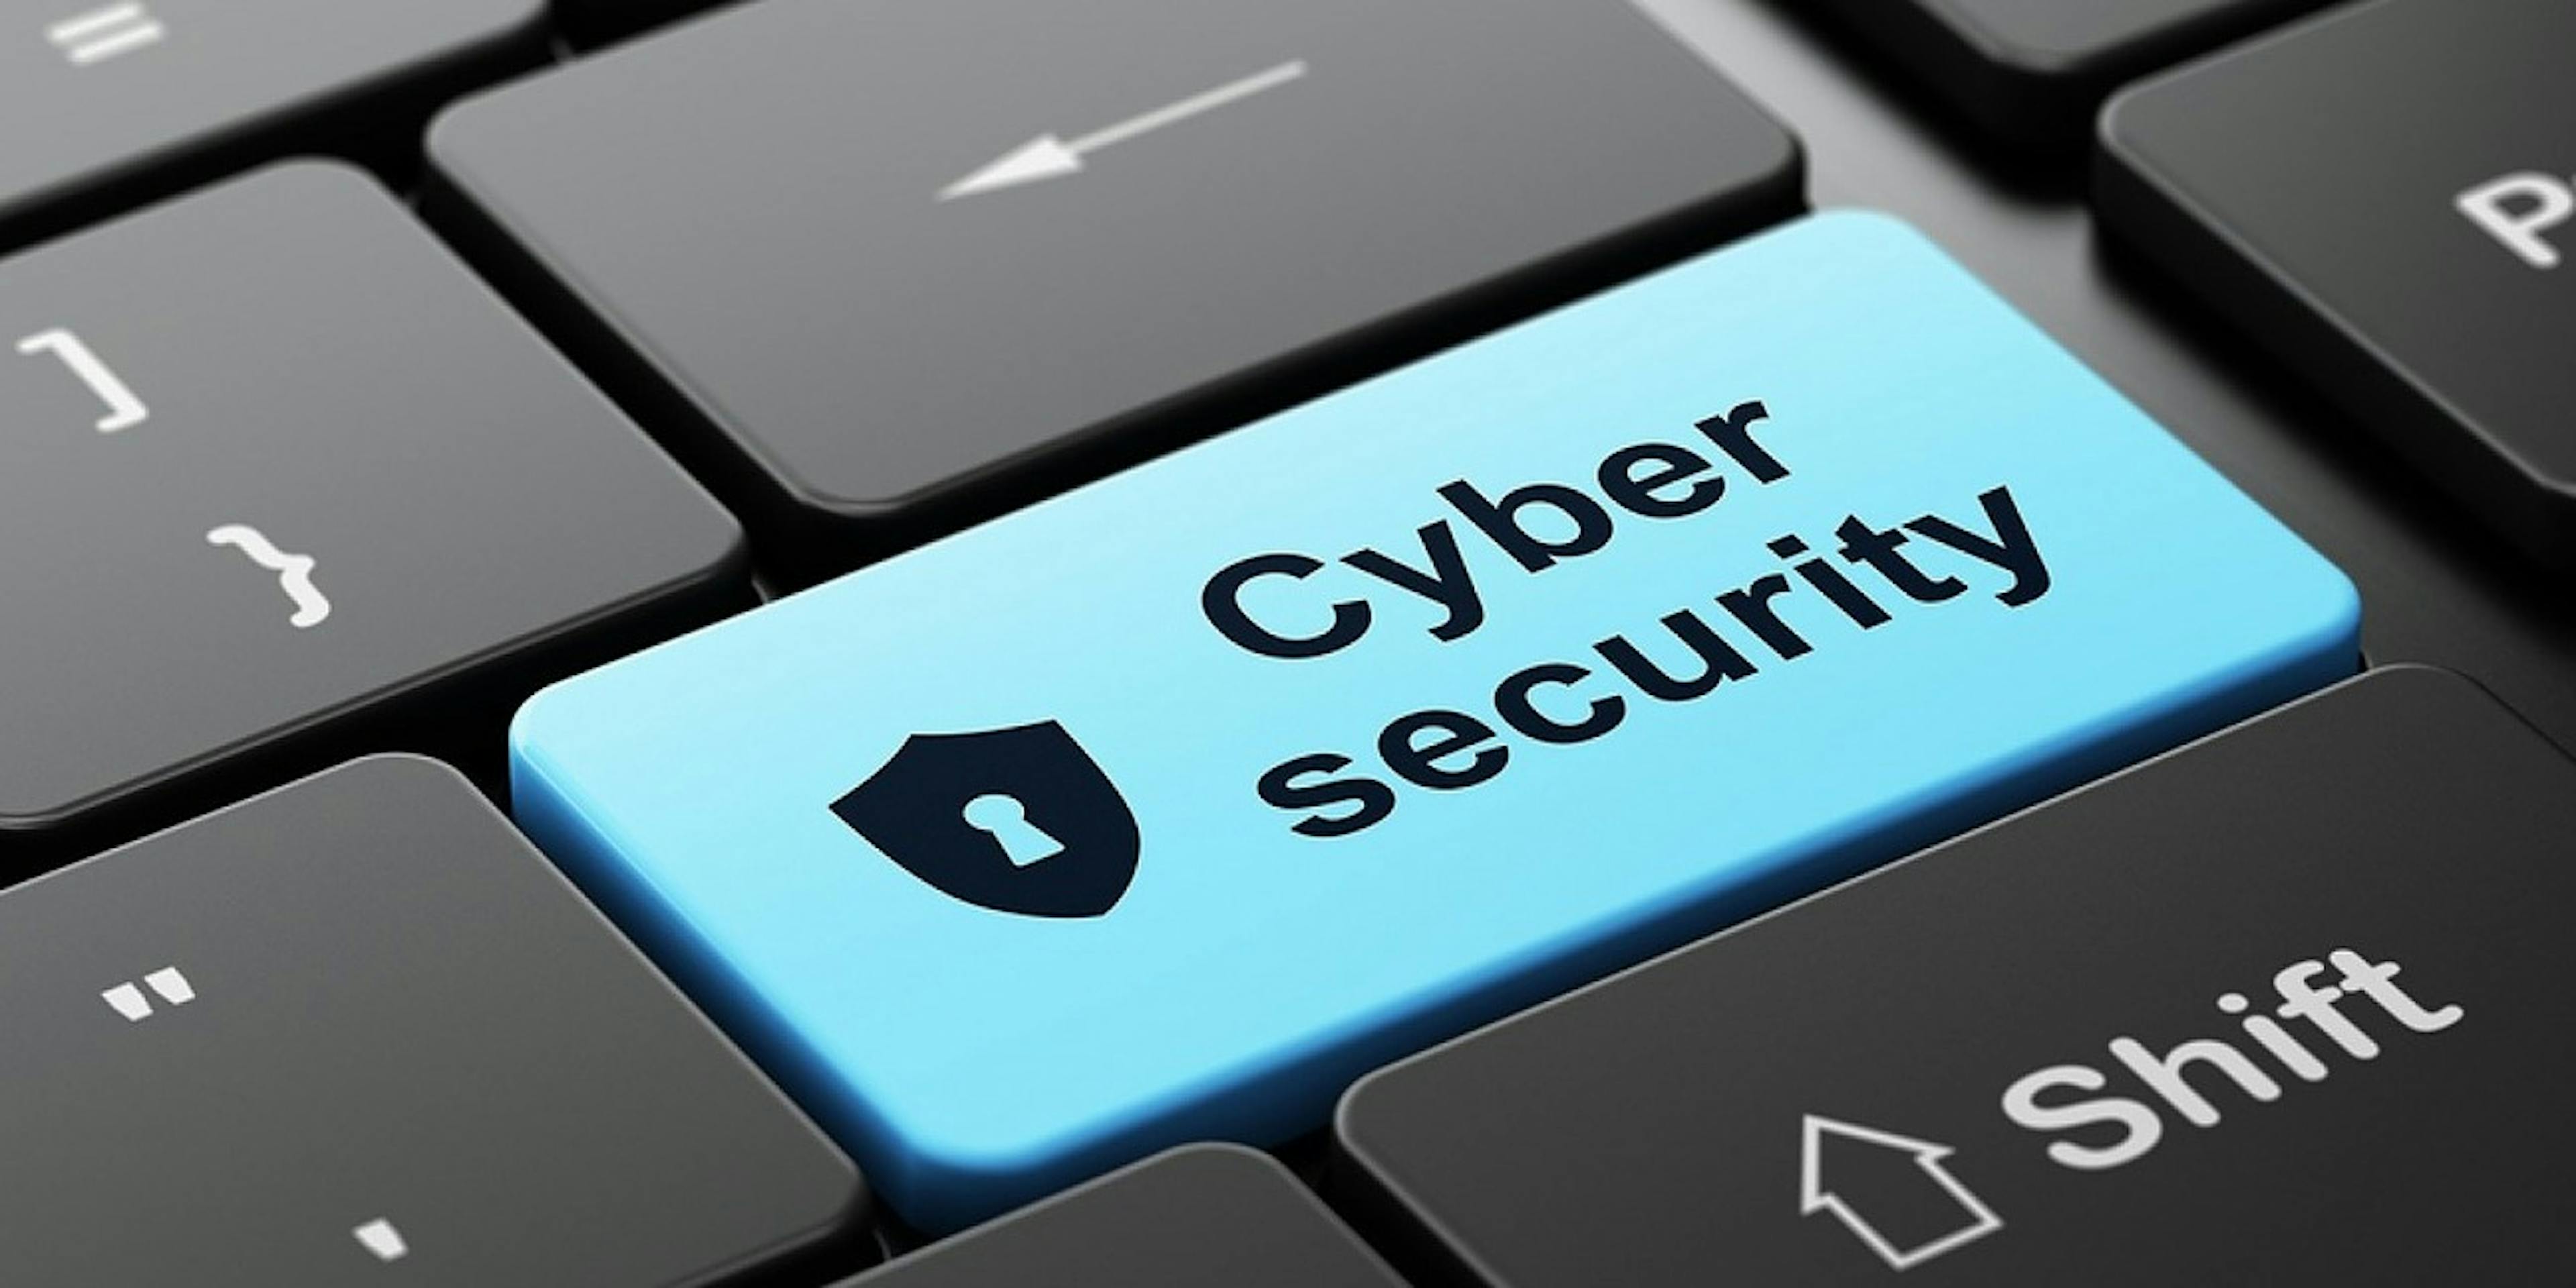 /nigeria-and-cyber-security-fp8b3zzs feature image